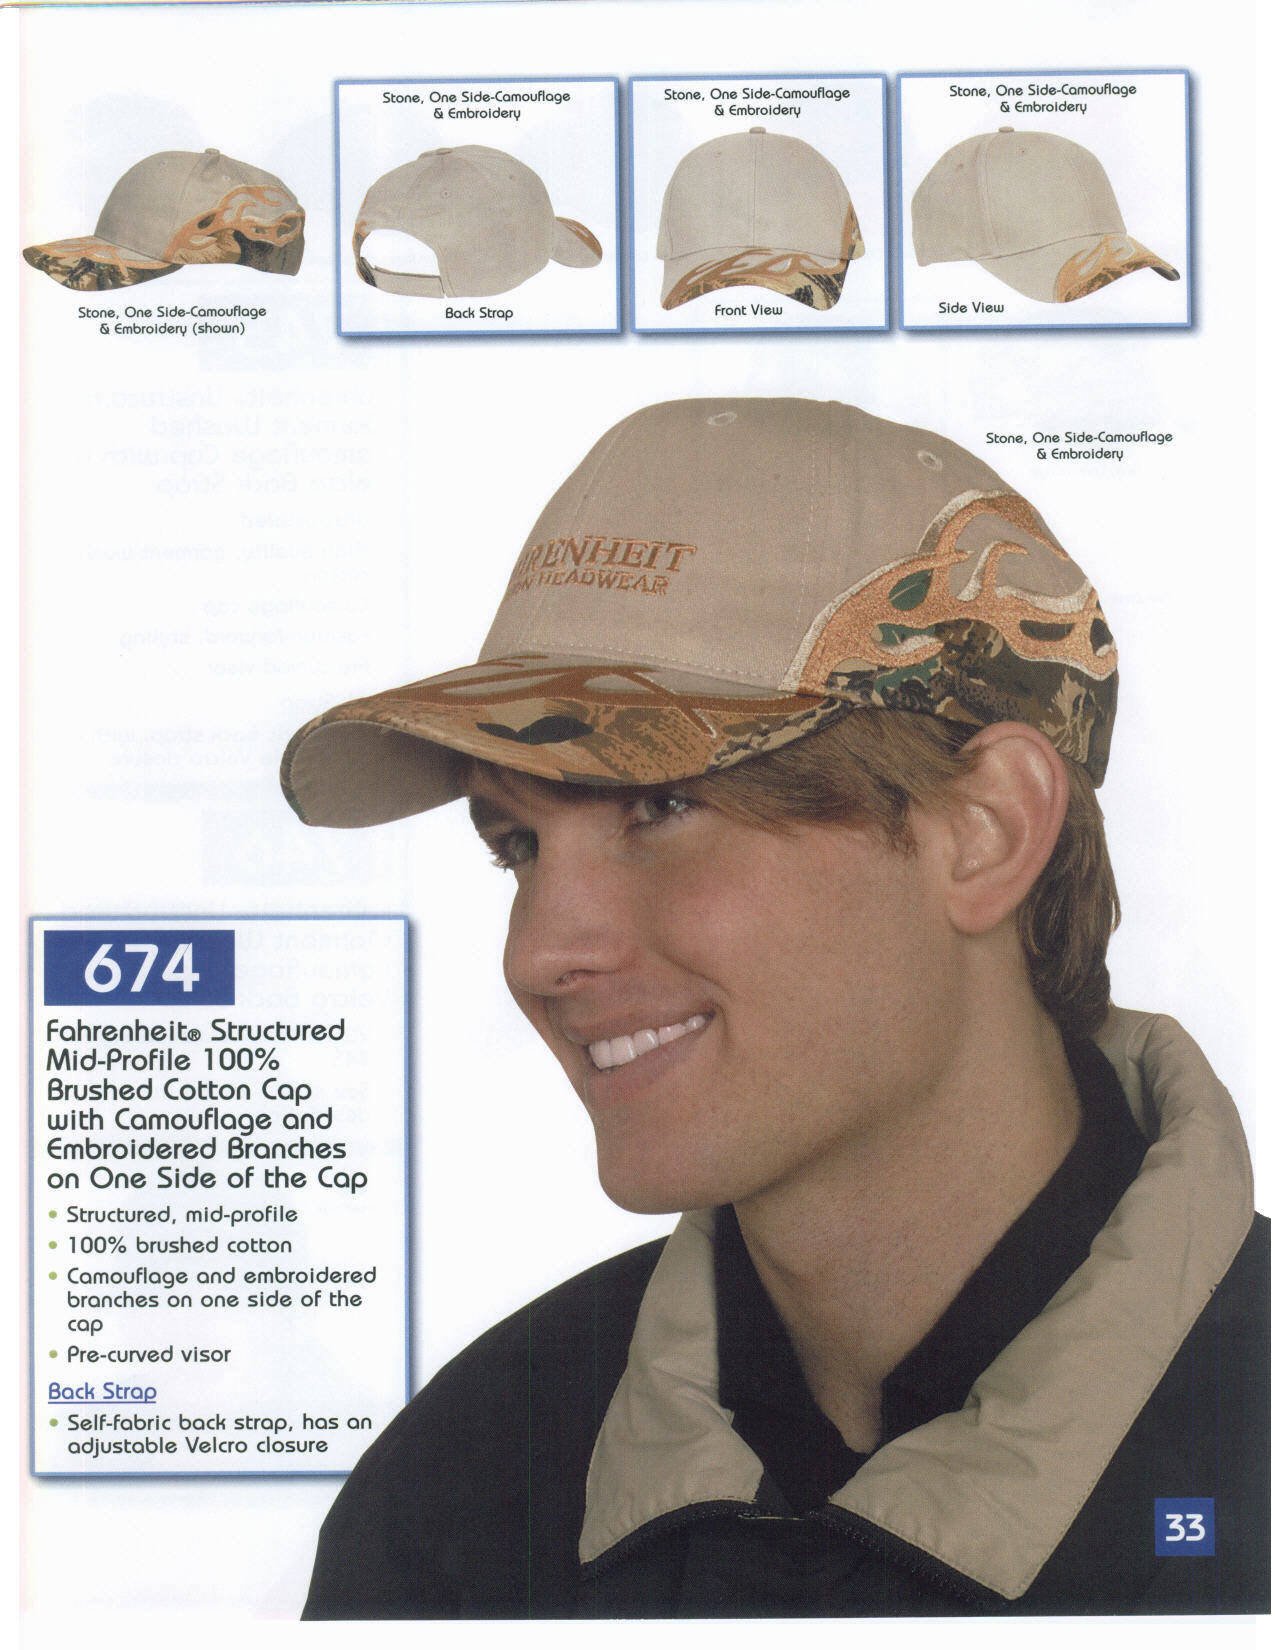 Structured Mid Pro File Brushed Cotton Cap with Camouflage and embroidered branches